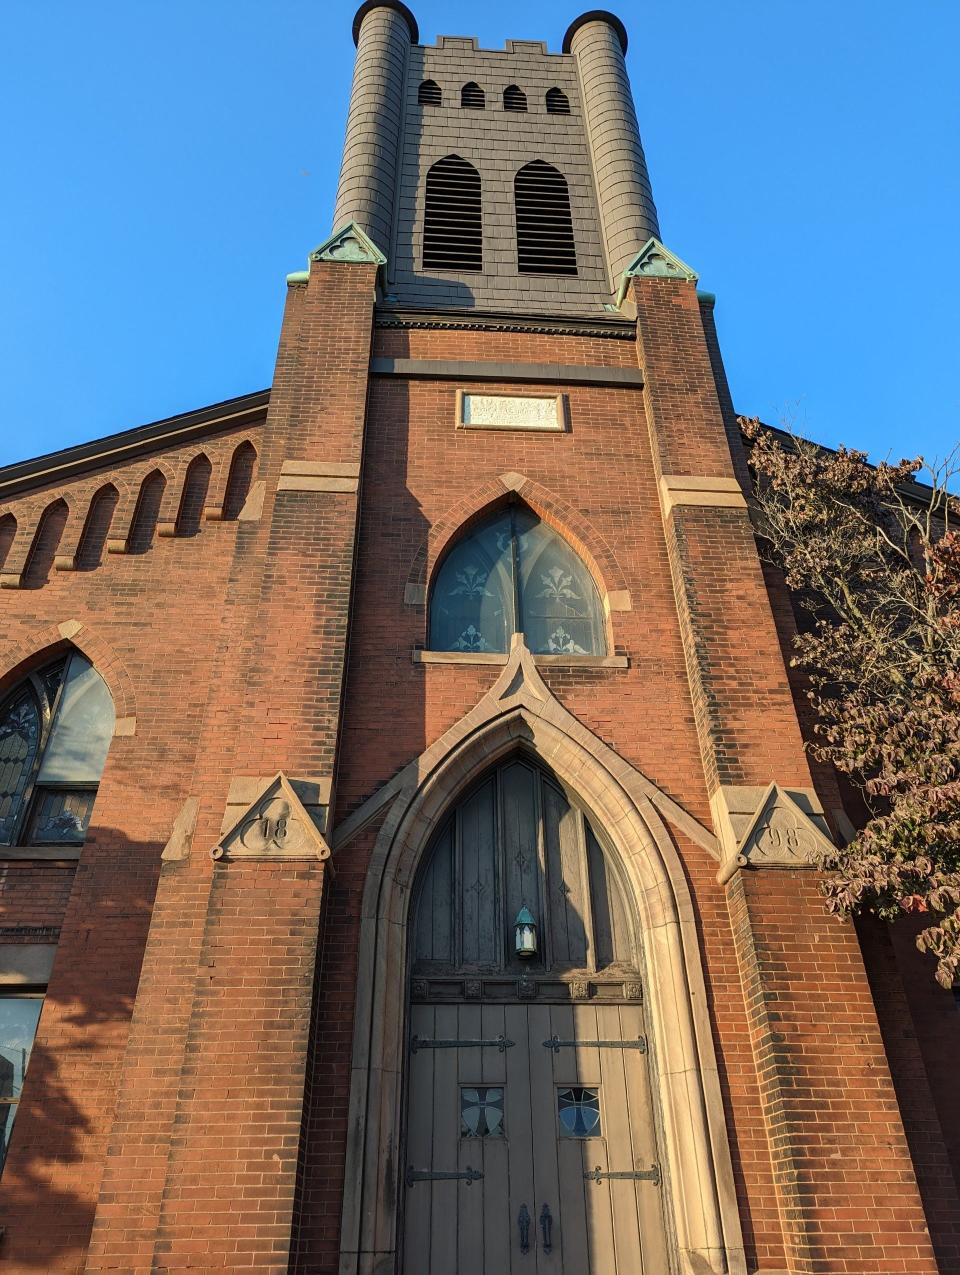 First Church of the Resurrection in Canton is listed on the National Register of Historic Places. It will become the home base for a RiverTree congregation on Oct. 1.